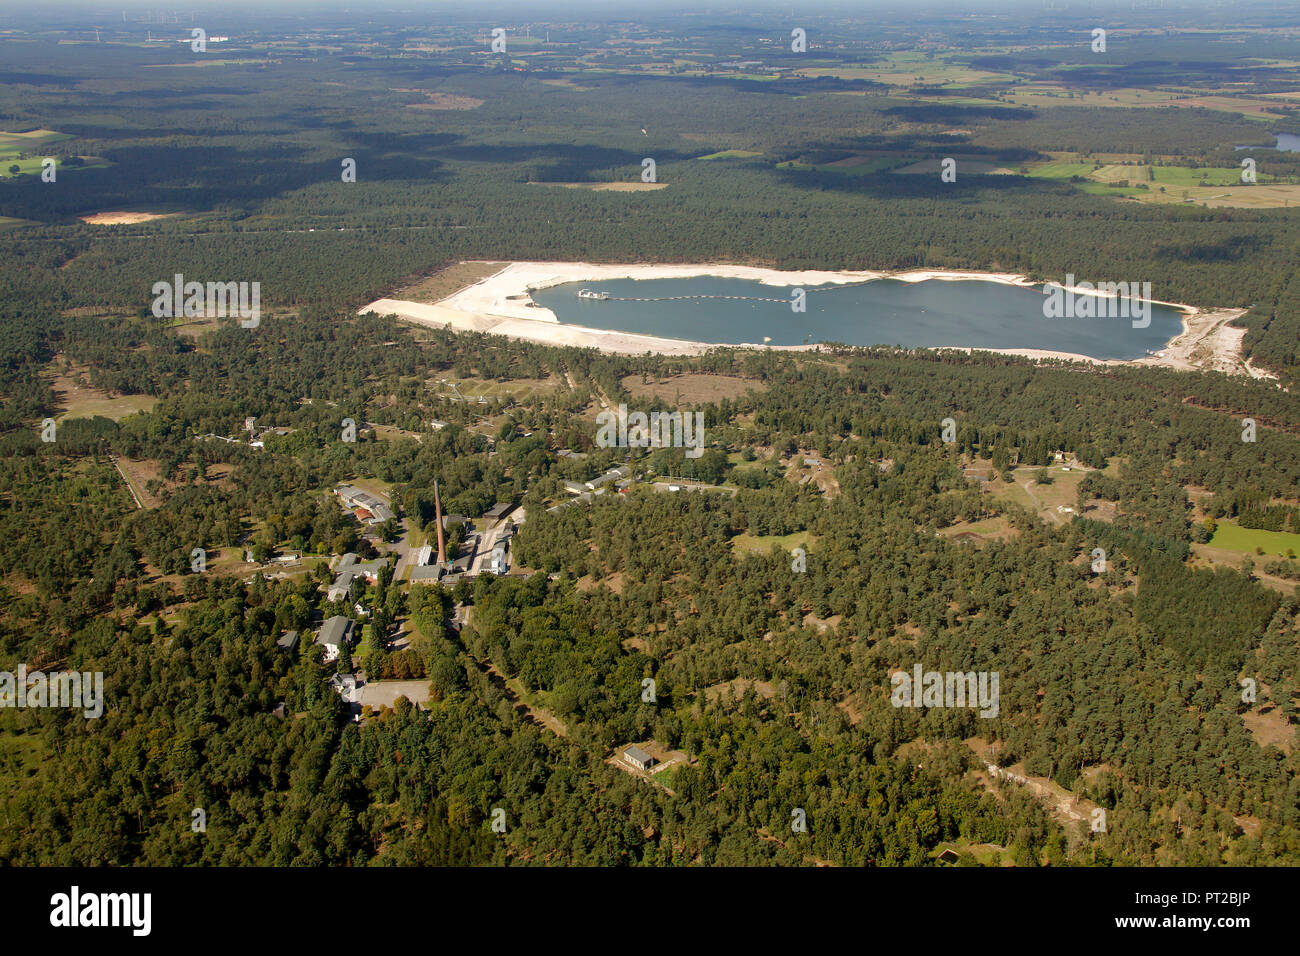 Aerial view, Sythen, Lehmbraken, WASAG, Explosives Factory, Hohe Mark Nature Park, Haltern am See, Ruhr Area, North Rhine-Westphalia, Germany, Europe, Stock Photo